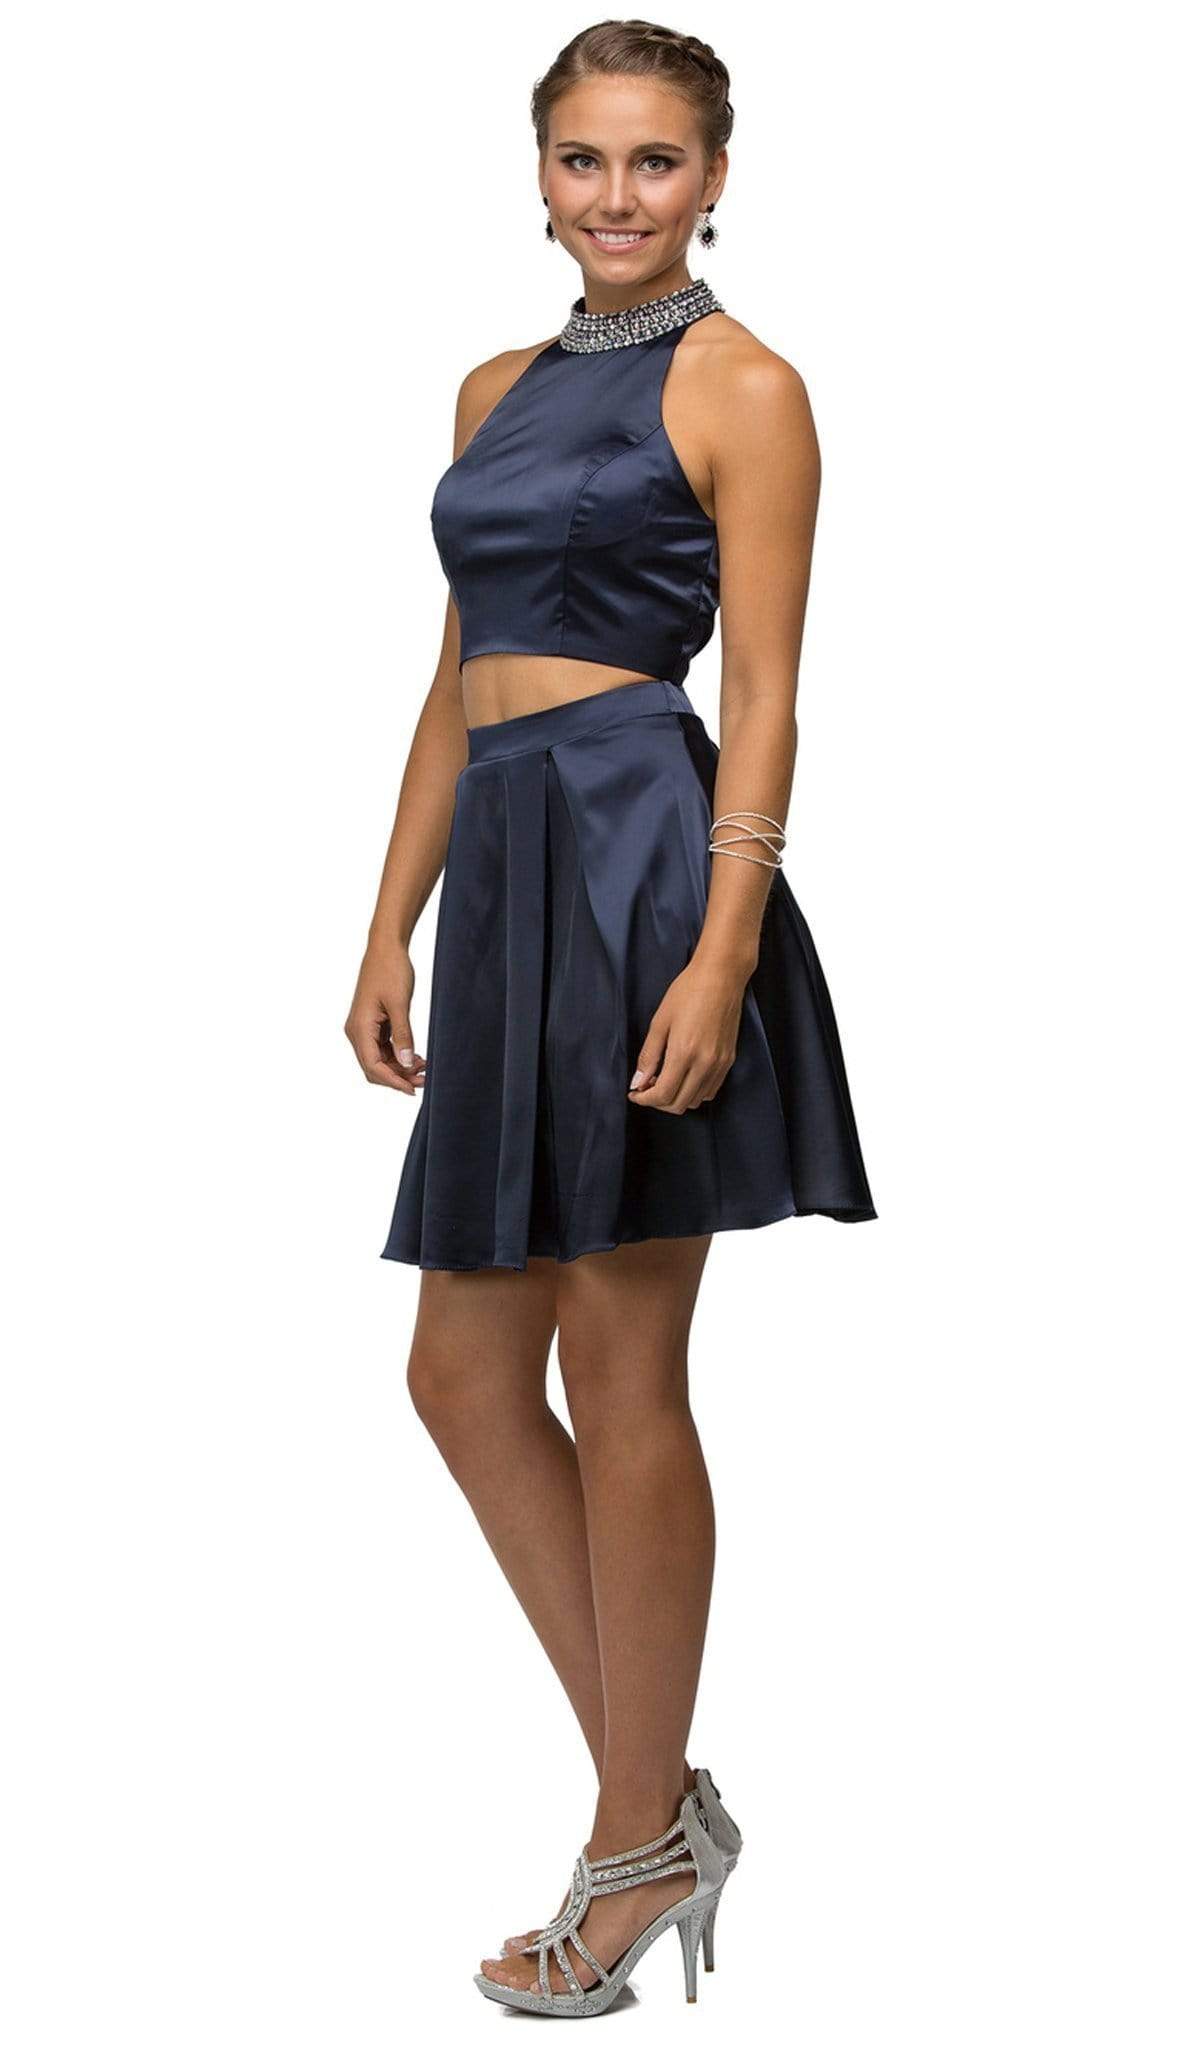 Dancing Queen - 9495 Embellished Collar Two-Piece Homecoming Dress Homecoming Dresses XS / Navy